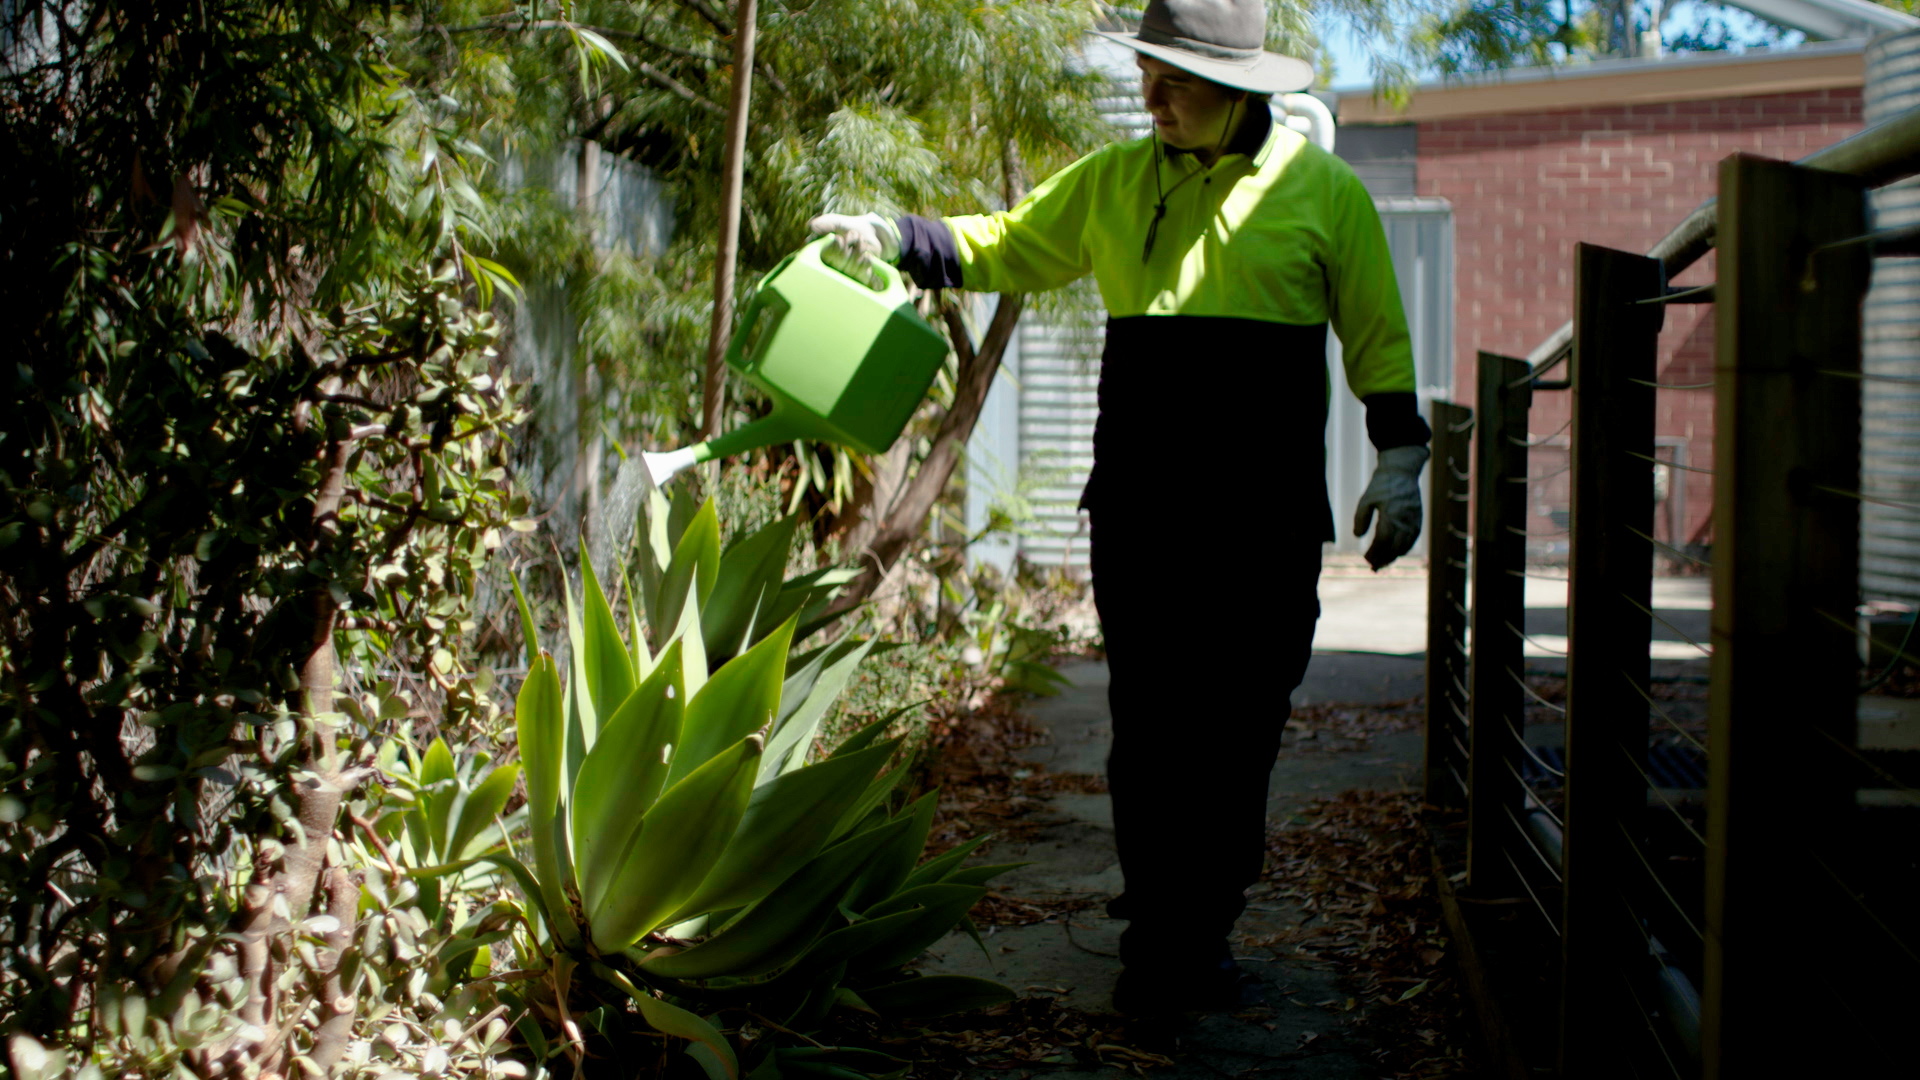 A young man wearing high viz long sleeved top and gardening gloves, watering plants outside with a watering can.